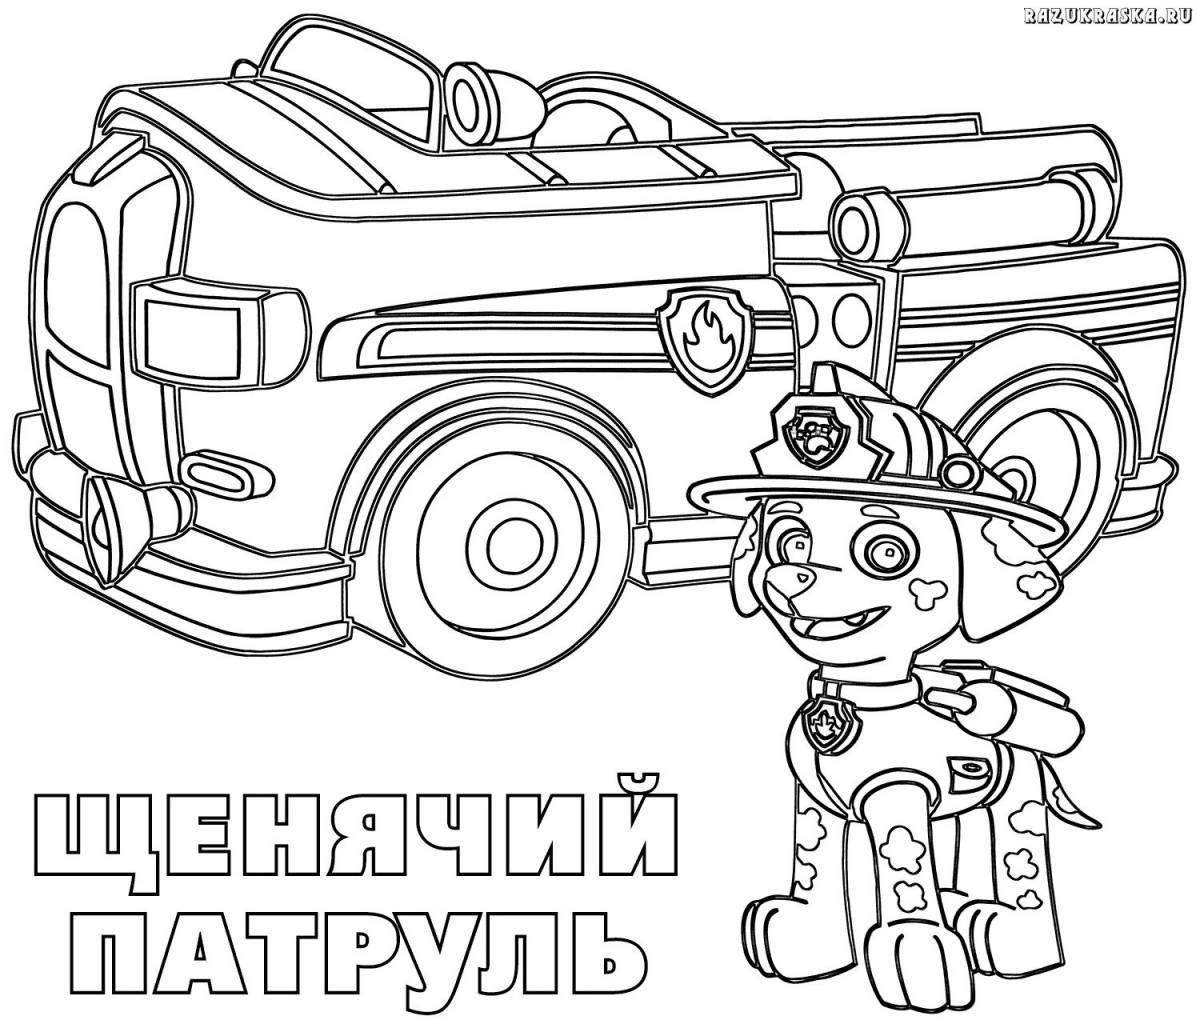 Bright paw patrol tower coloring page